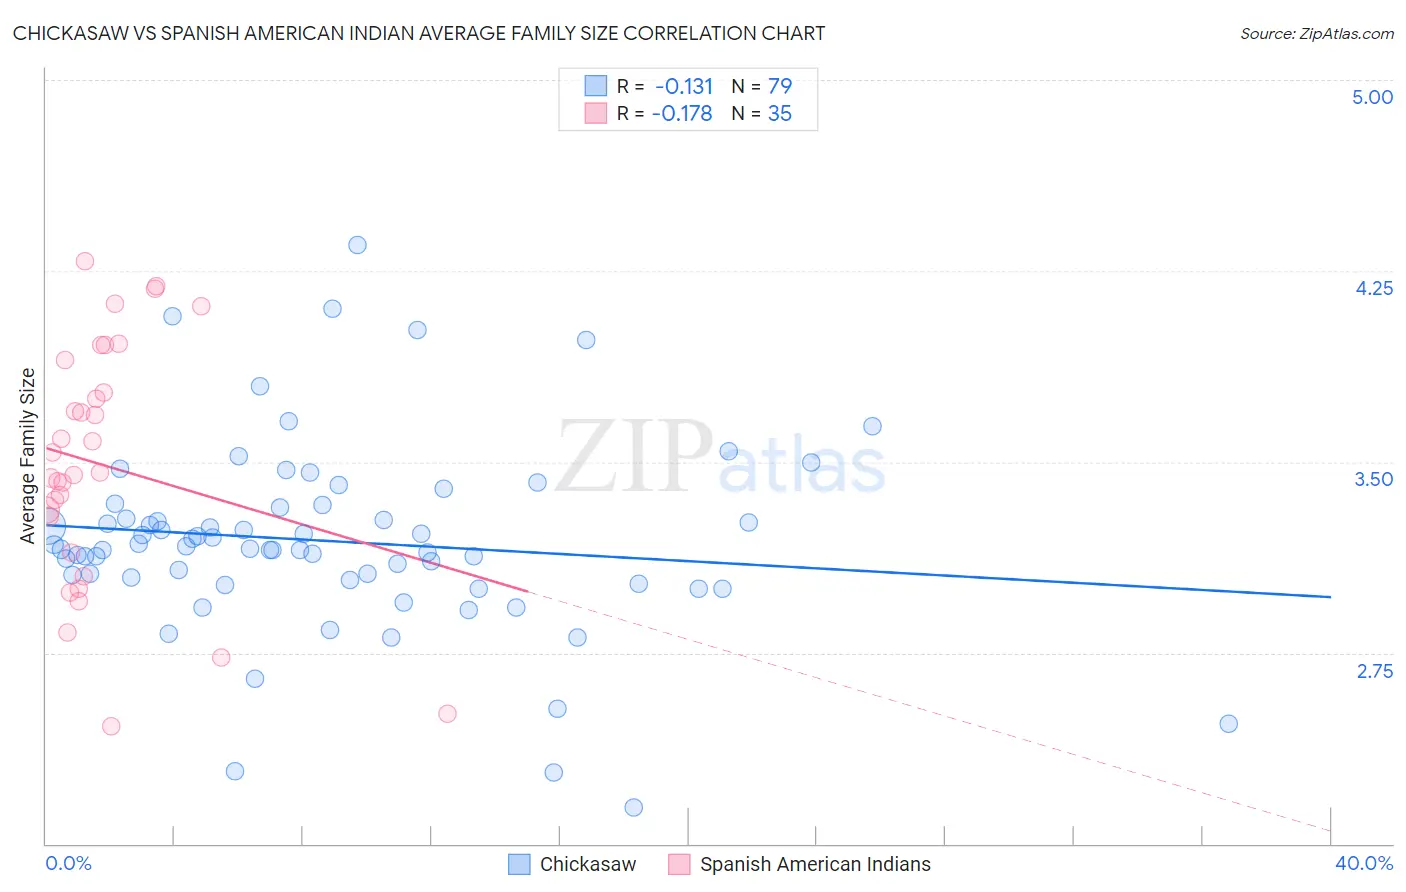 Chickasaw vs Spanish American Indian Average Family Size